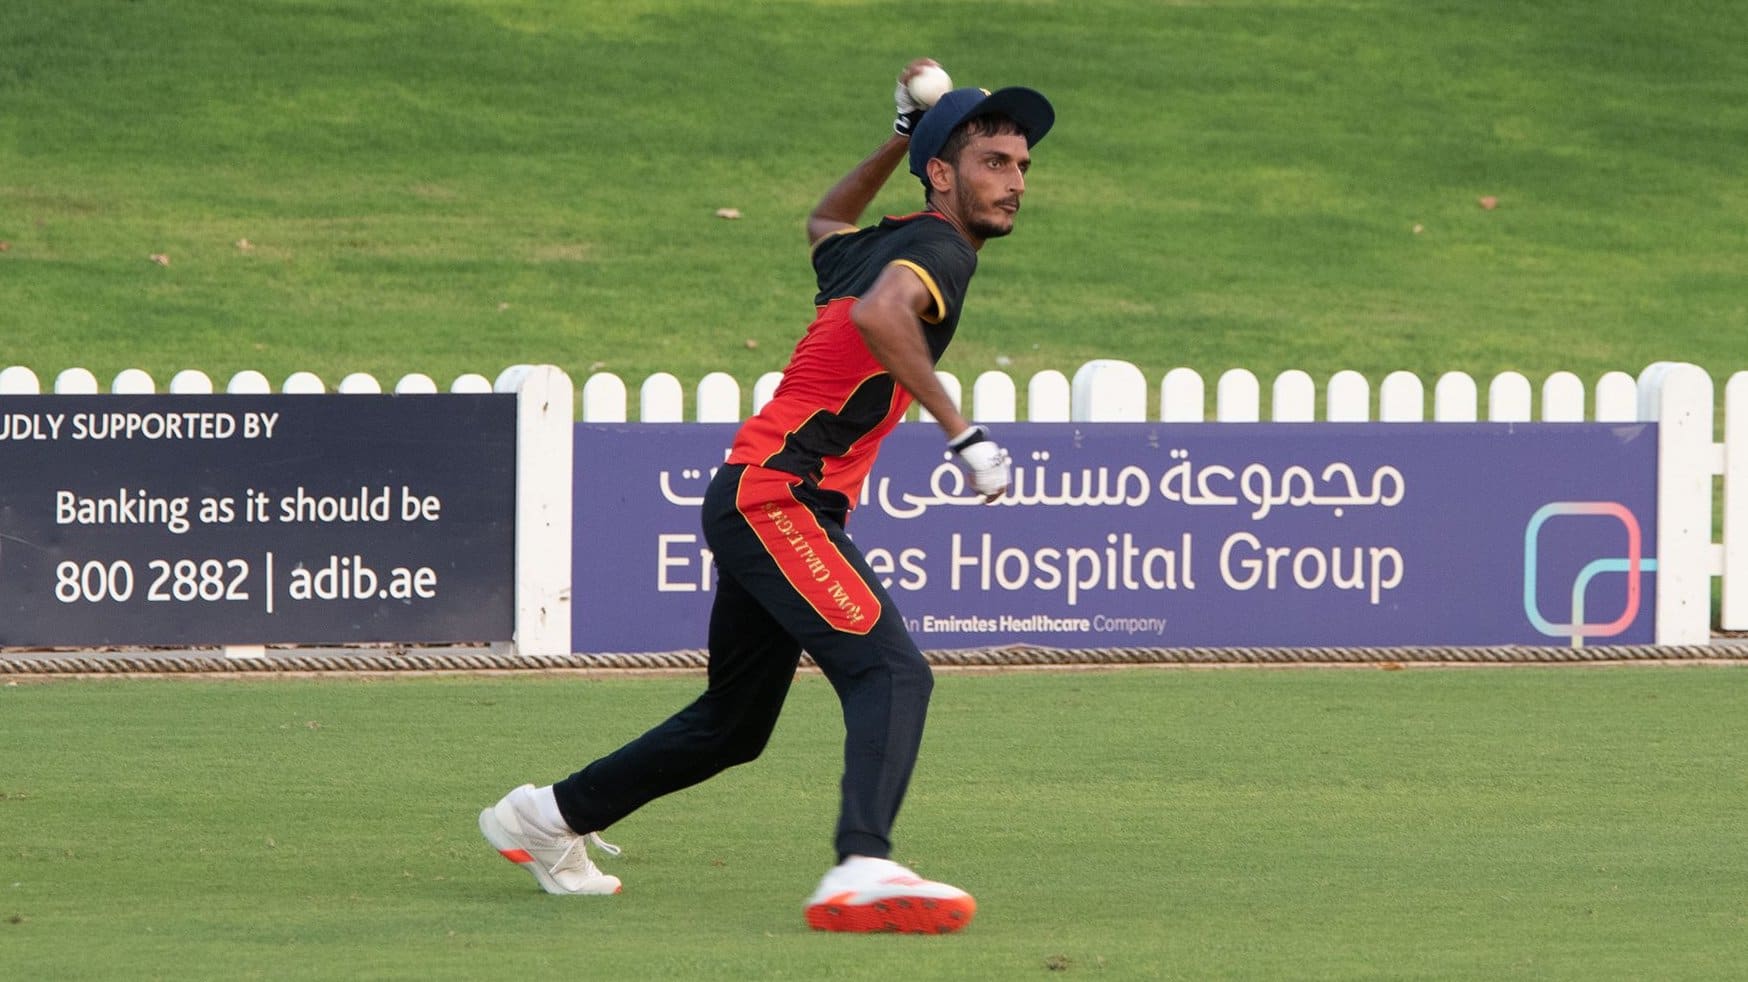 RCB all-rounder set to debut for India